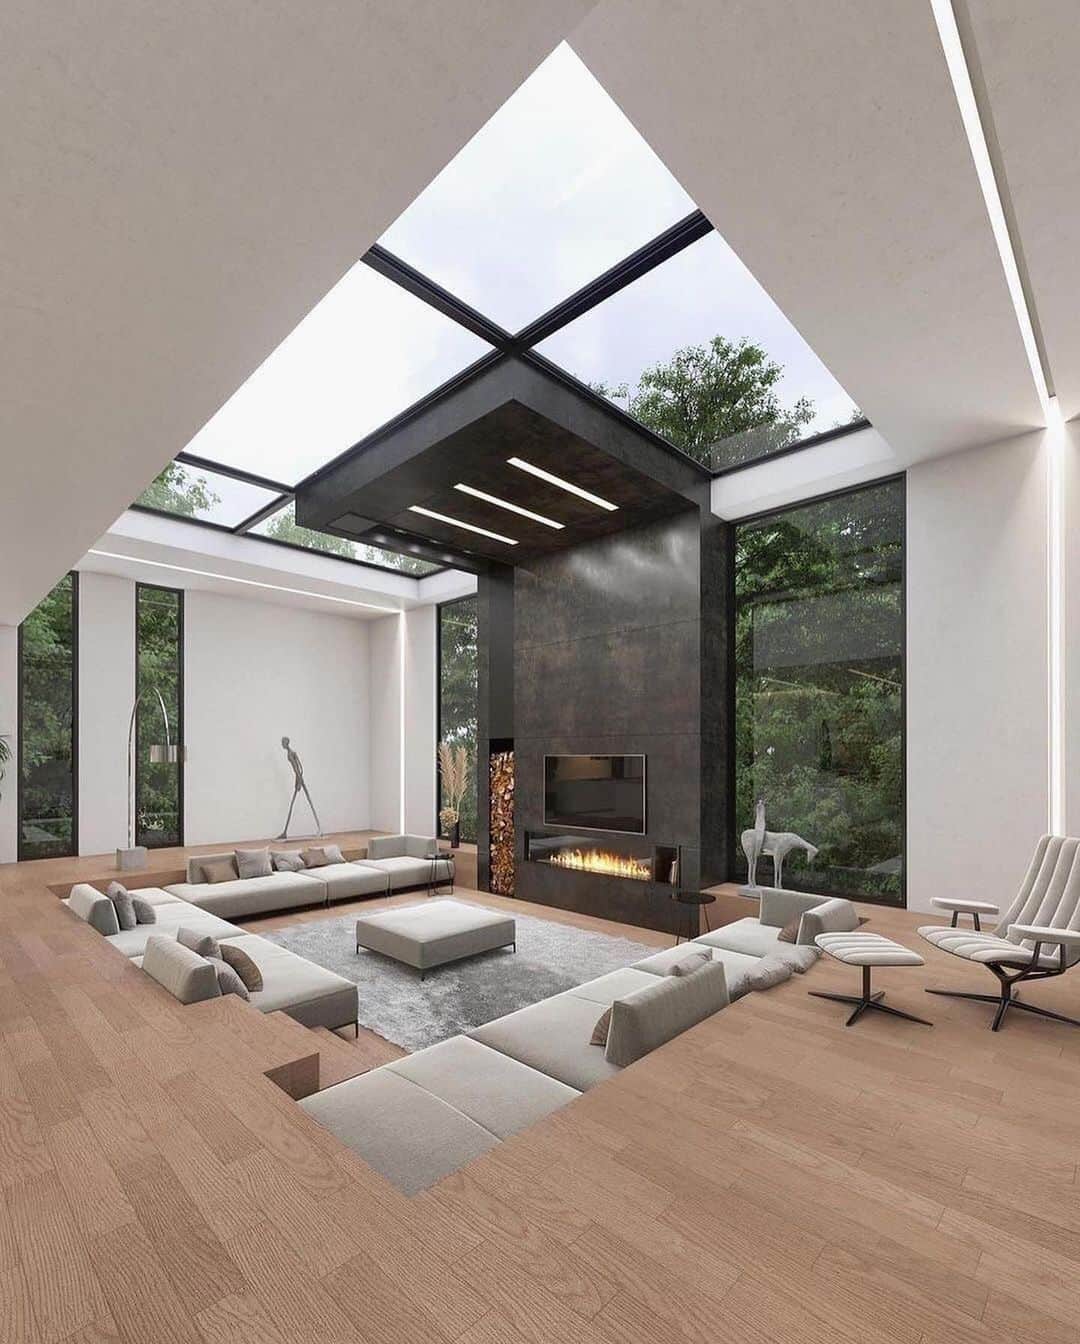 Architecture - Housesのインスタグラム：「The yin and yang 🖤🤍 design by @mohtashami_reza full of contrasts 🔝 outside black and inside all white.... Which part do you like more? 😍  ____ #interiordesign #moderndesign #designers #architecture #modernarchitecture #luxuryrealestate #moderninterior #moderninteriordesign #interiordesign #homedesign #homeinteriors #decoration #mansions #interiordetails #interiorideas #interiorstylist #interior4you #interiør」